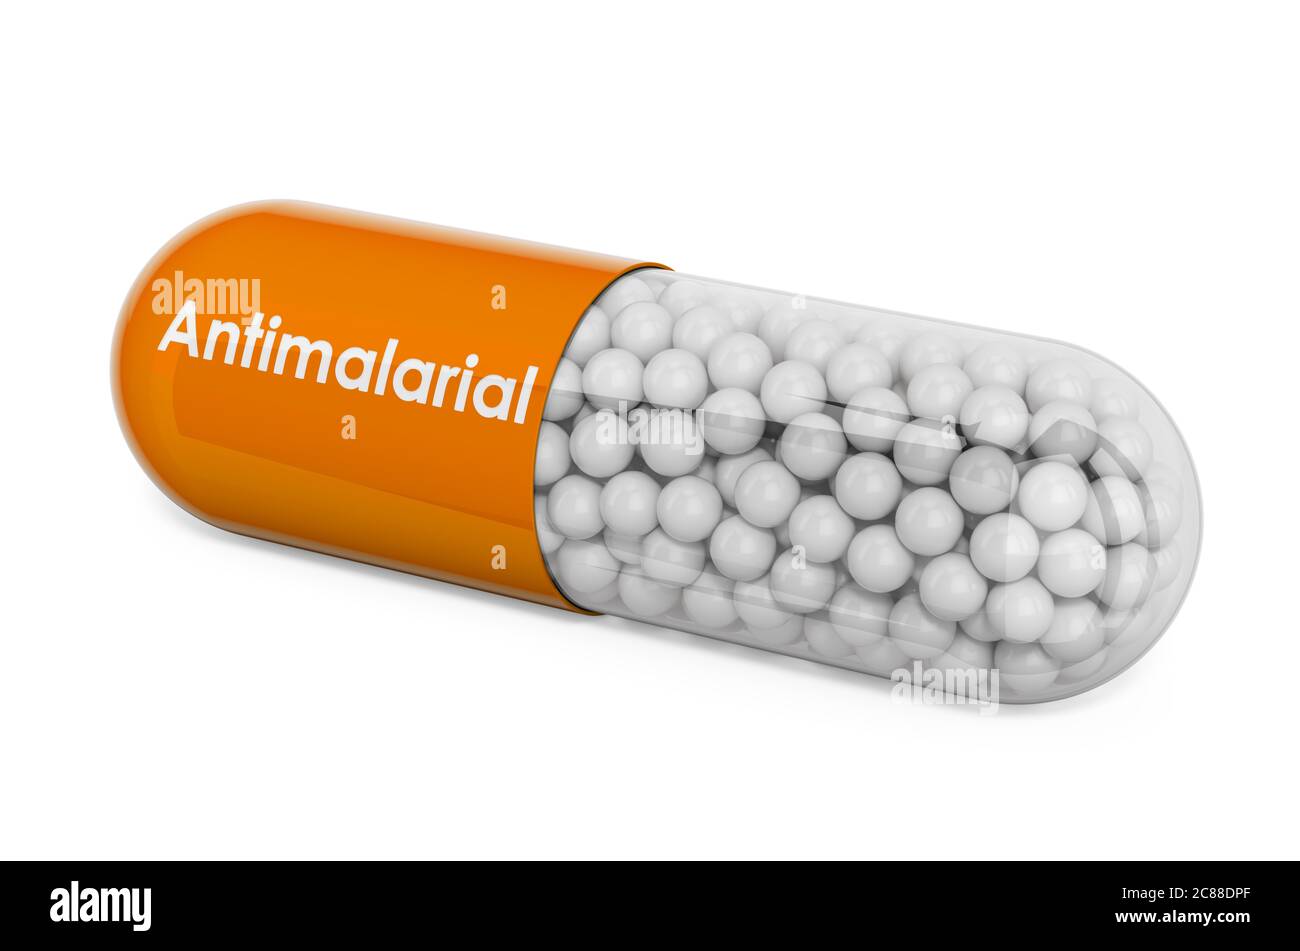 Antimalarial Drug, capsule with antimalarial. 3D rendering isolated on white background Stock Photo